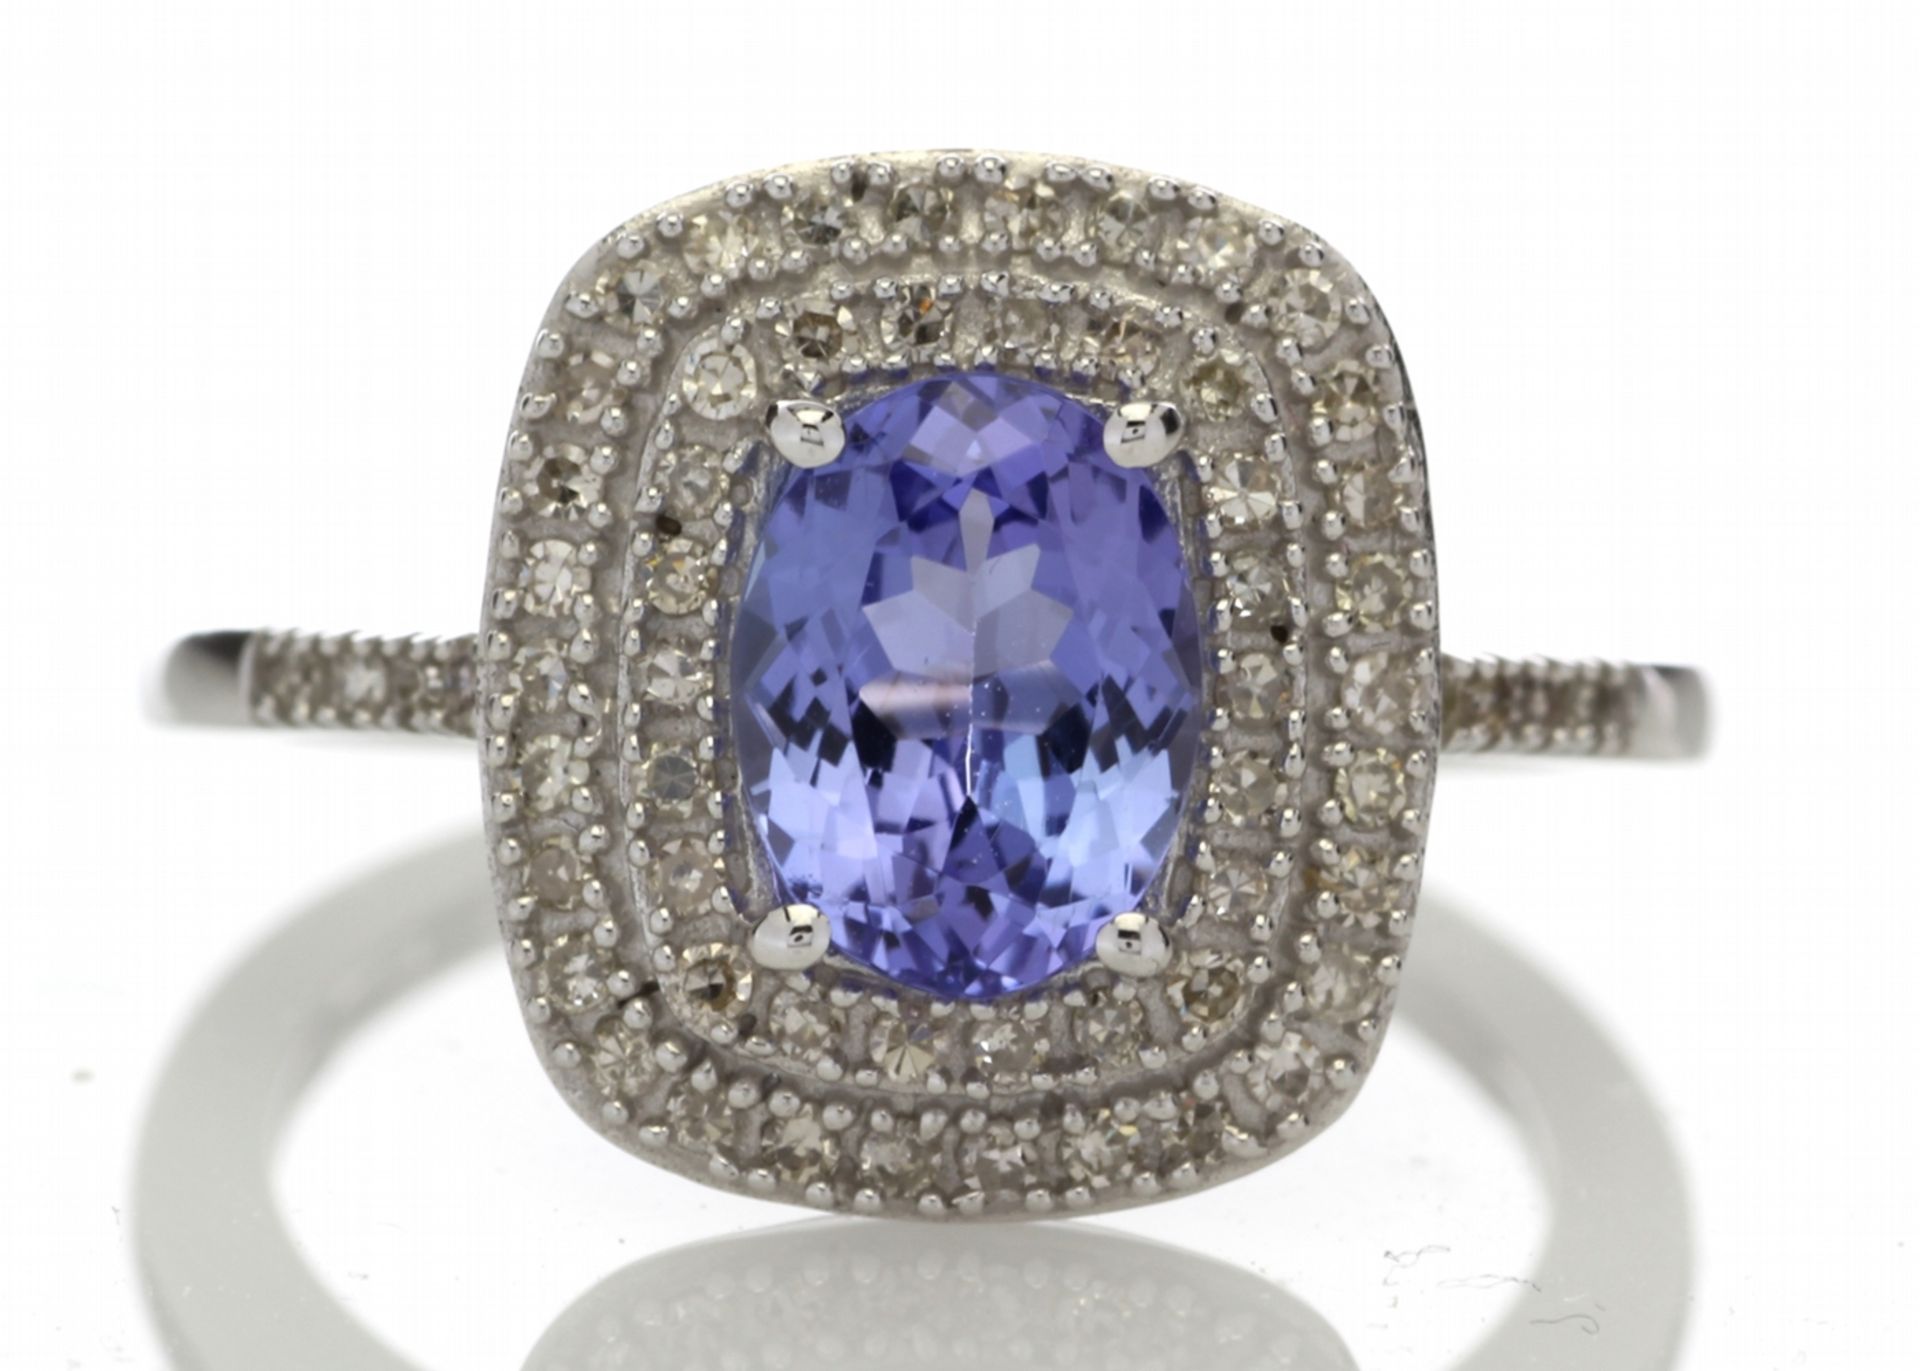 9ct Gold Oval Tanzanite And Diamond Cluster Ring 0.33 Carats - Valued by GIE £3,620.00 - 9ct Gold